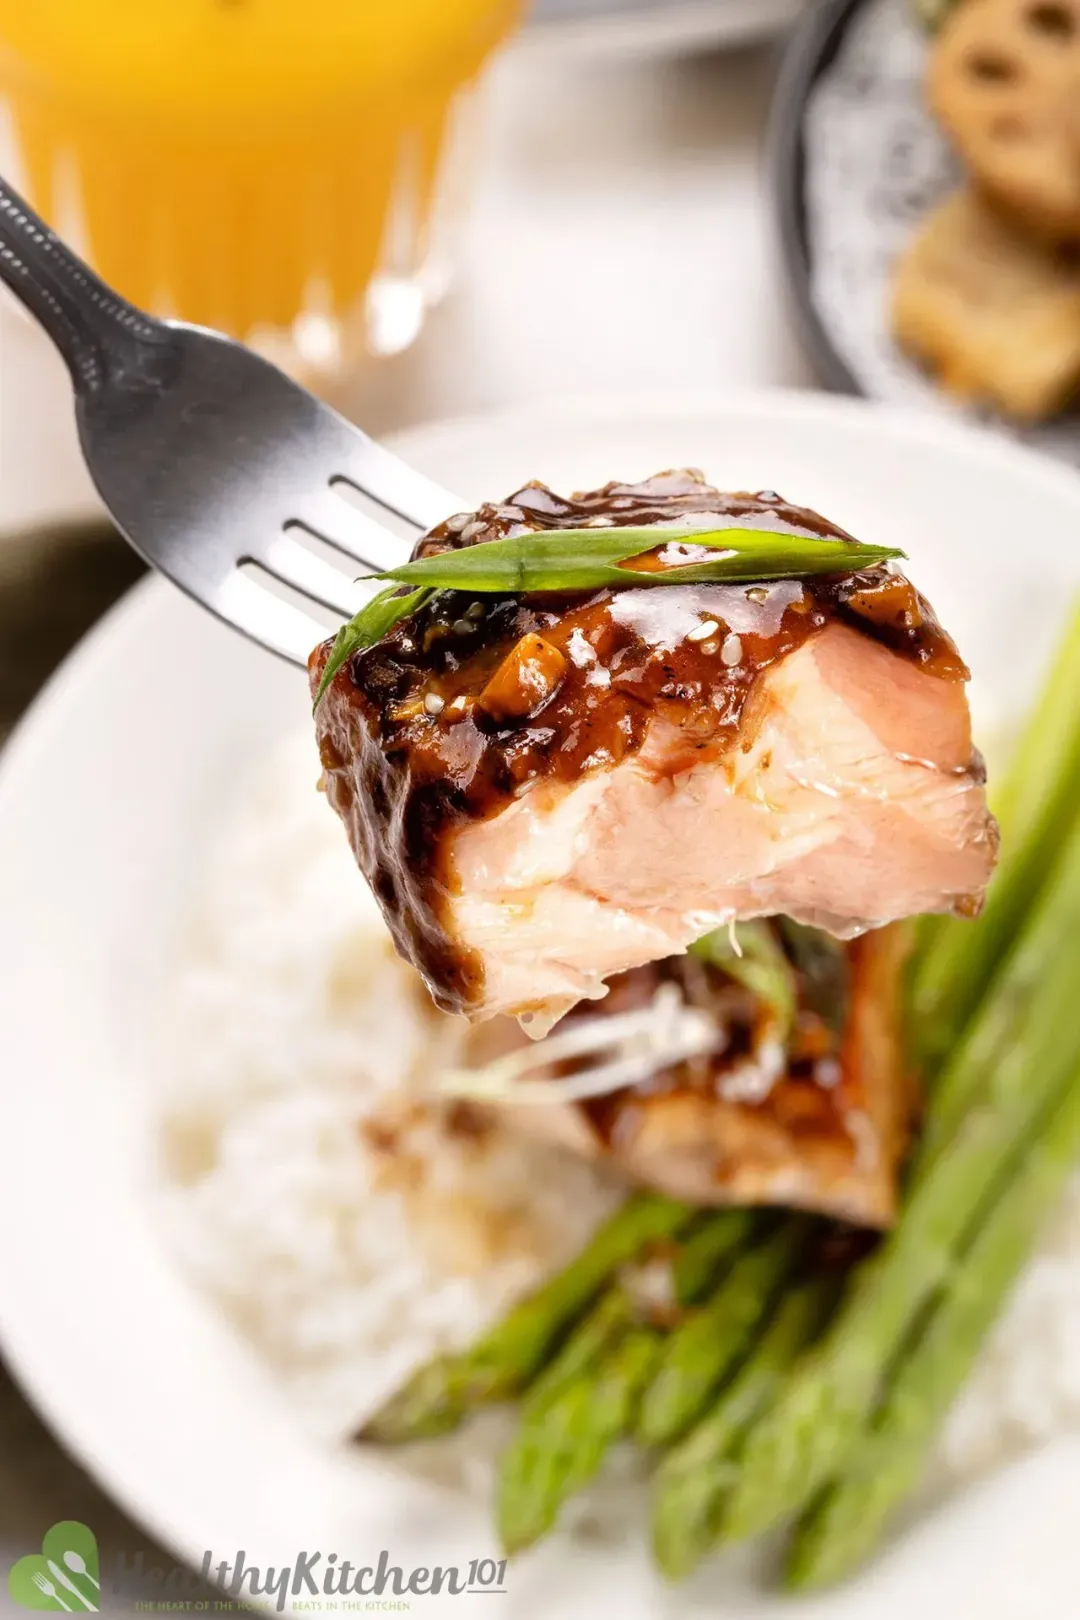 A mouth-sized piece of baked teriyaki salmon pierced by a fork with a chop of scallion placed on top; at the back is a serving plate containing a whole salmon filet, cooked white rice, and asparagus.